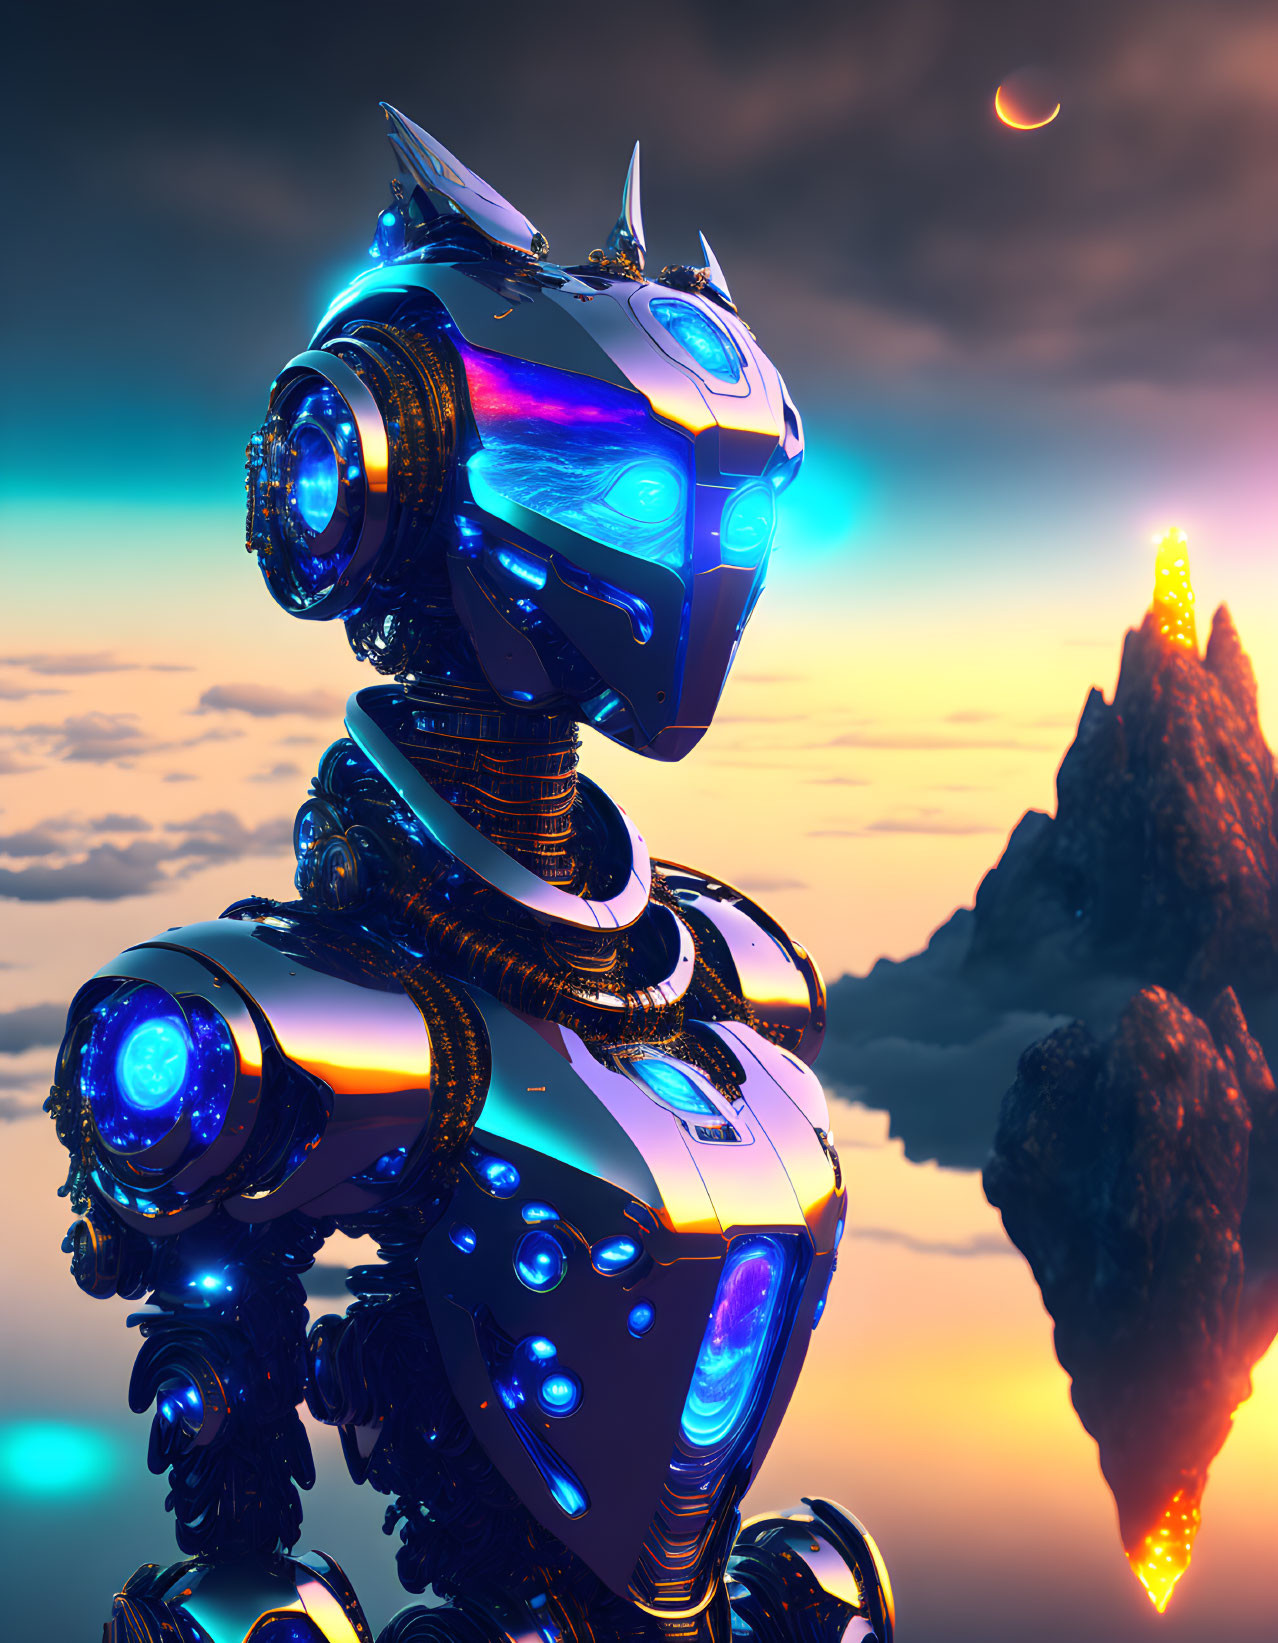 Detailed CG futuristic robot with blue glowing parts against a backdrop of a sun and floating rocks